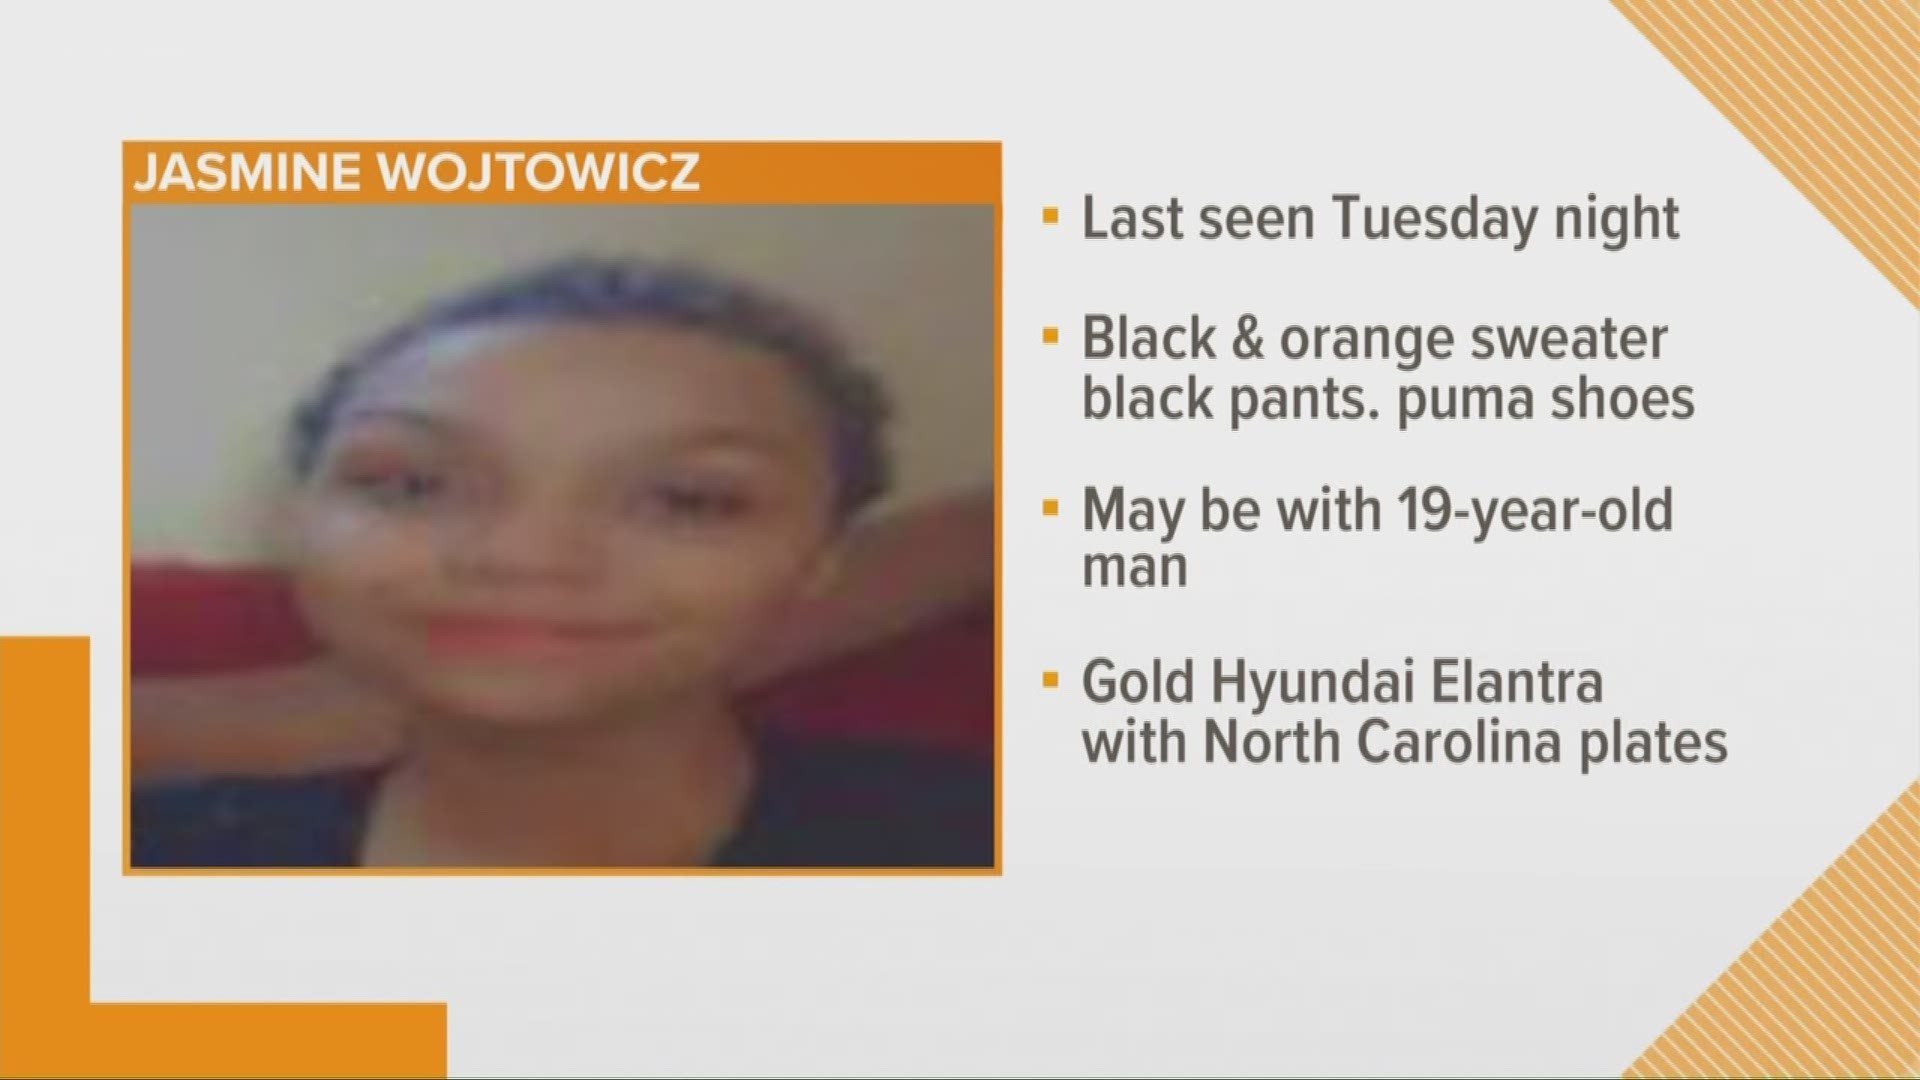 Sept. 18, 2019: Newburgh Heights police are searching for a 15-year-old girl who is possibly with a 19-year-old man. Jasmine Wojtowicz was last seen Tuesday night at her home on E. 54th Street. Investigators found out Jasmine had been talking online with a man named 'Jalen.'